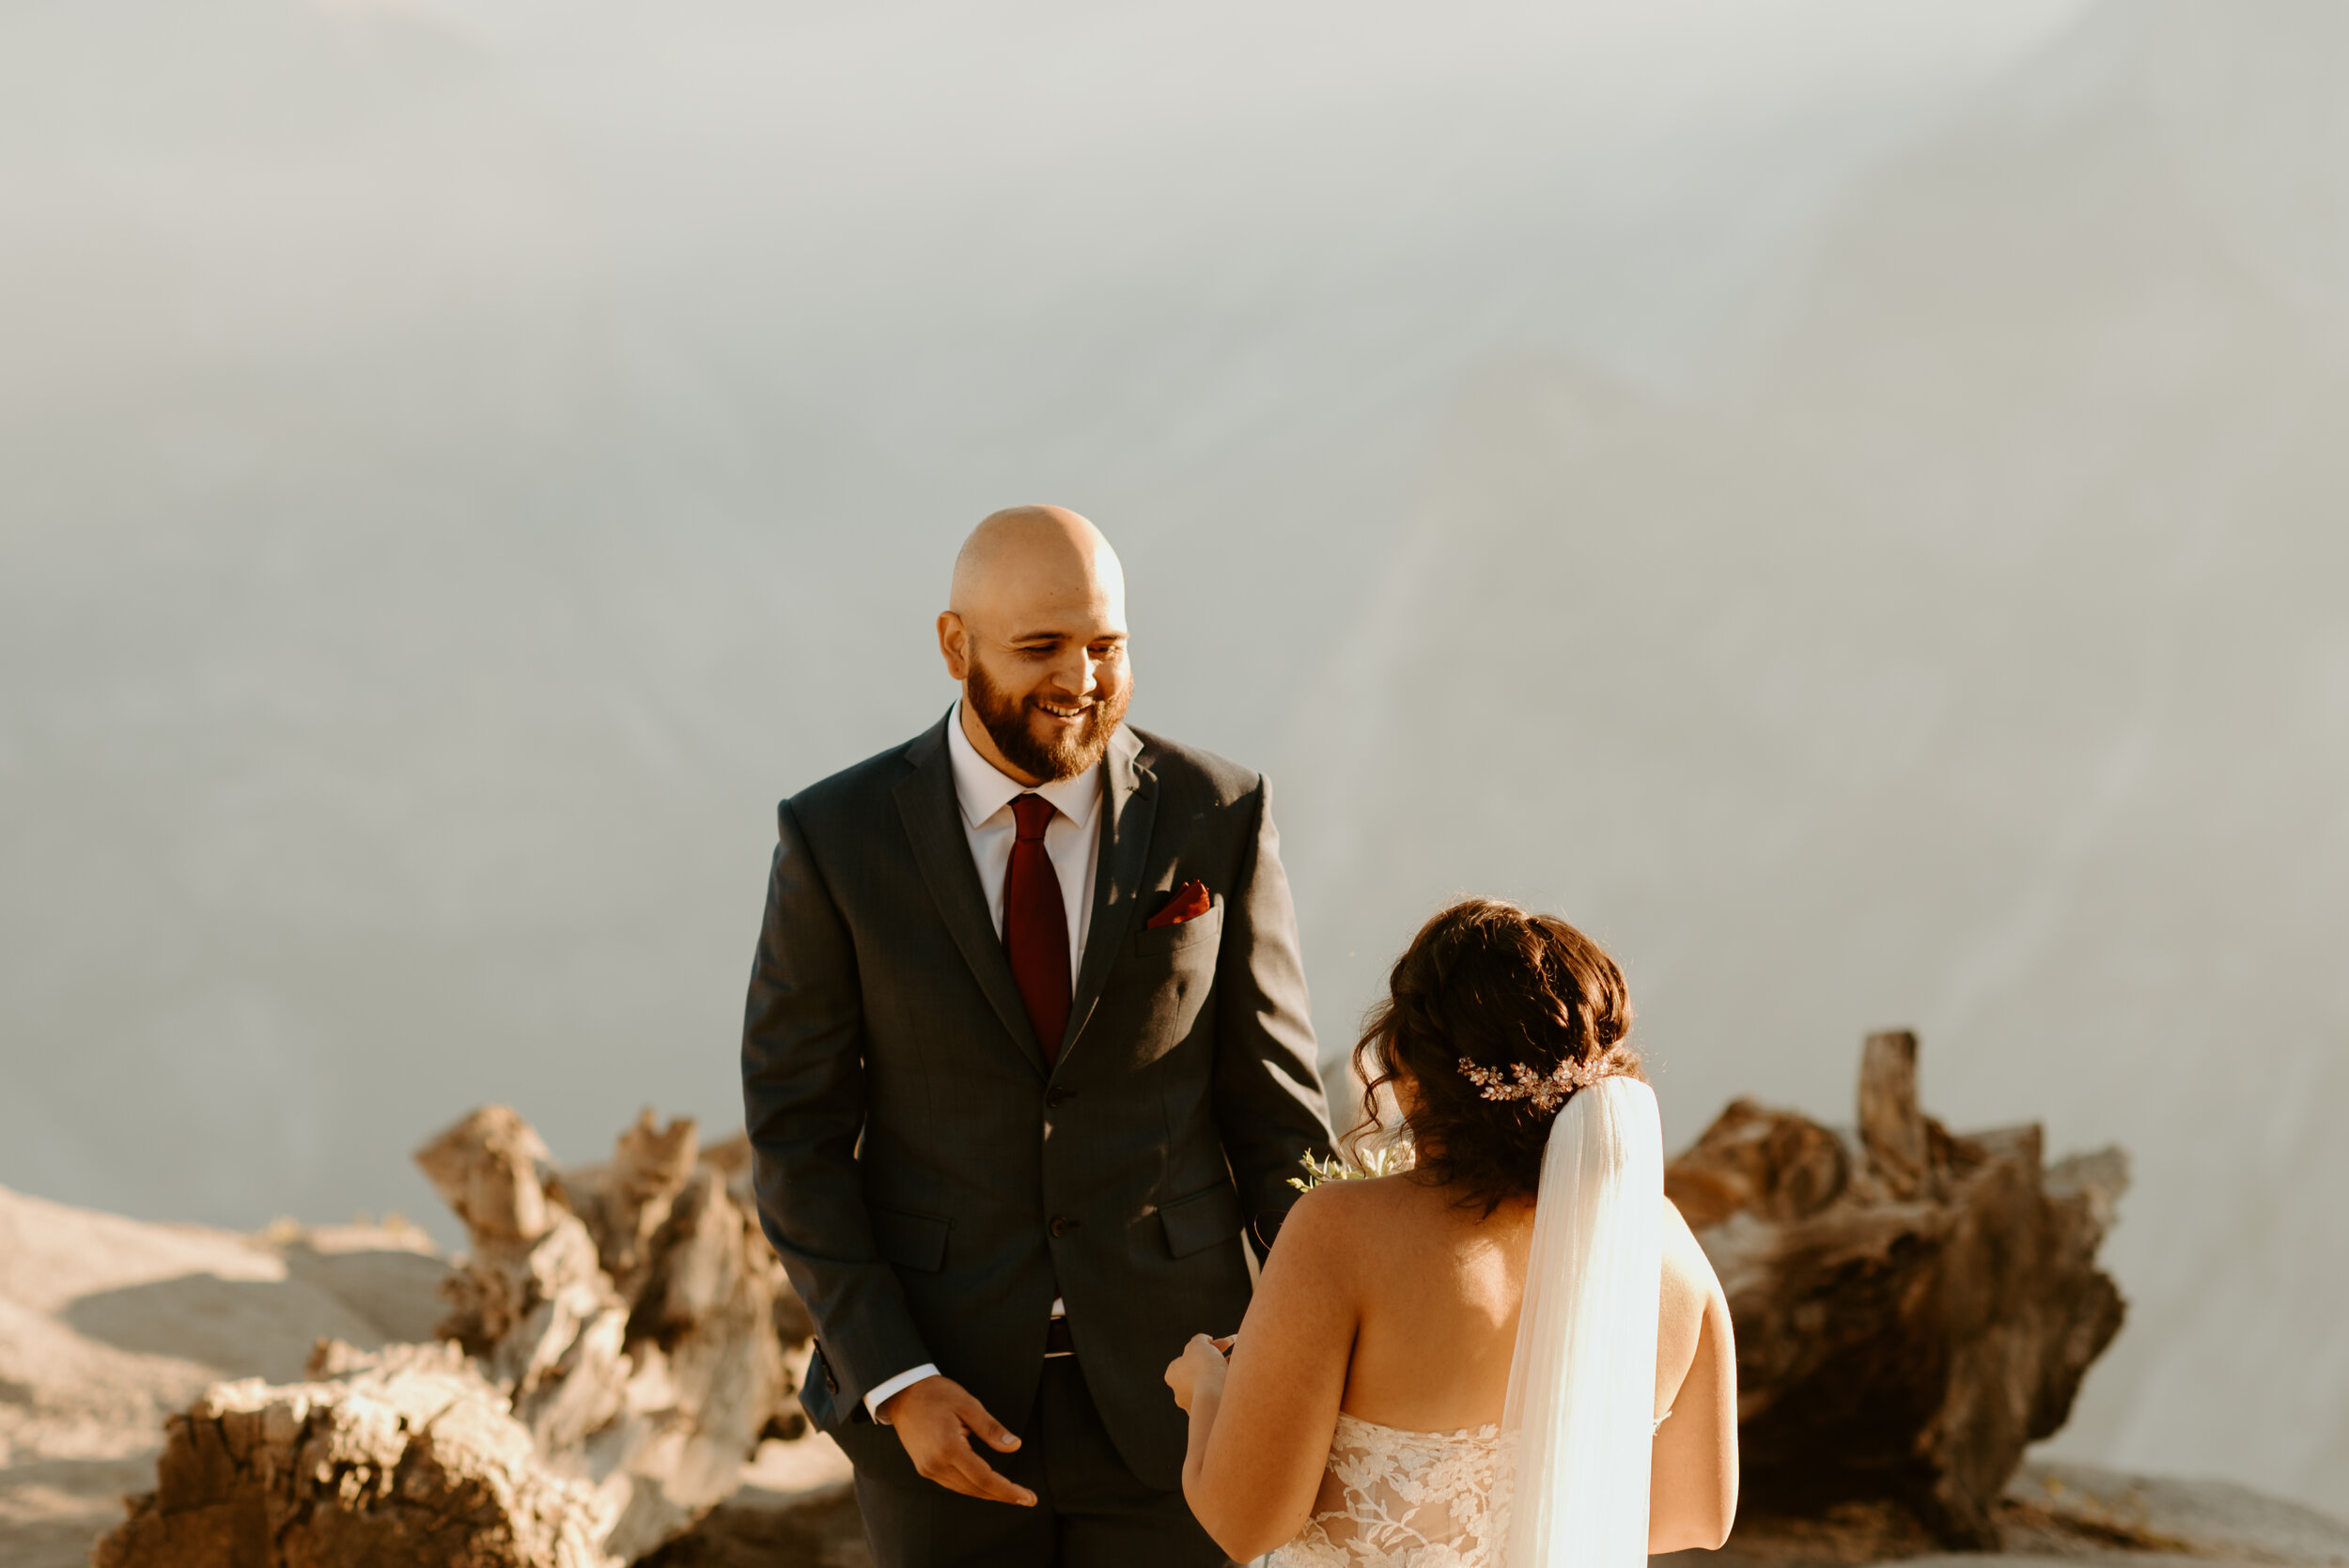 Glacier Point Elopement | Yosemite National Park Elopement and Wedding Photographer | Sunrise adventure elopement | California Elopement Photographer | First Look